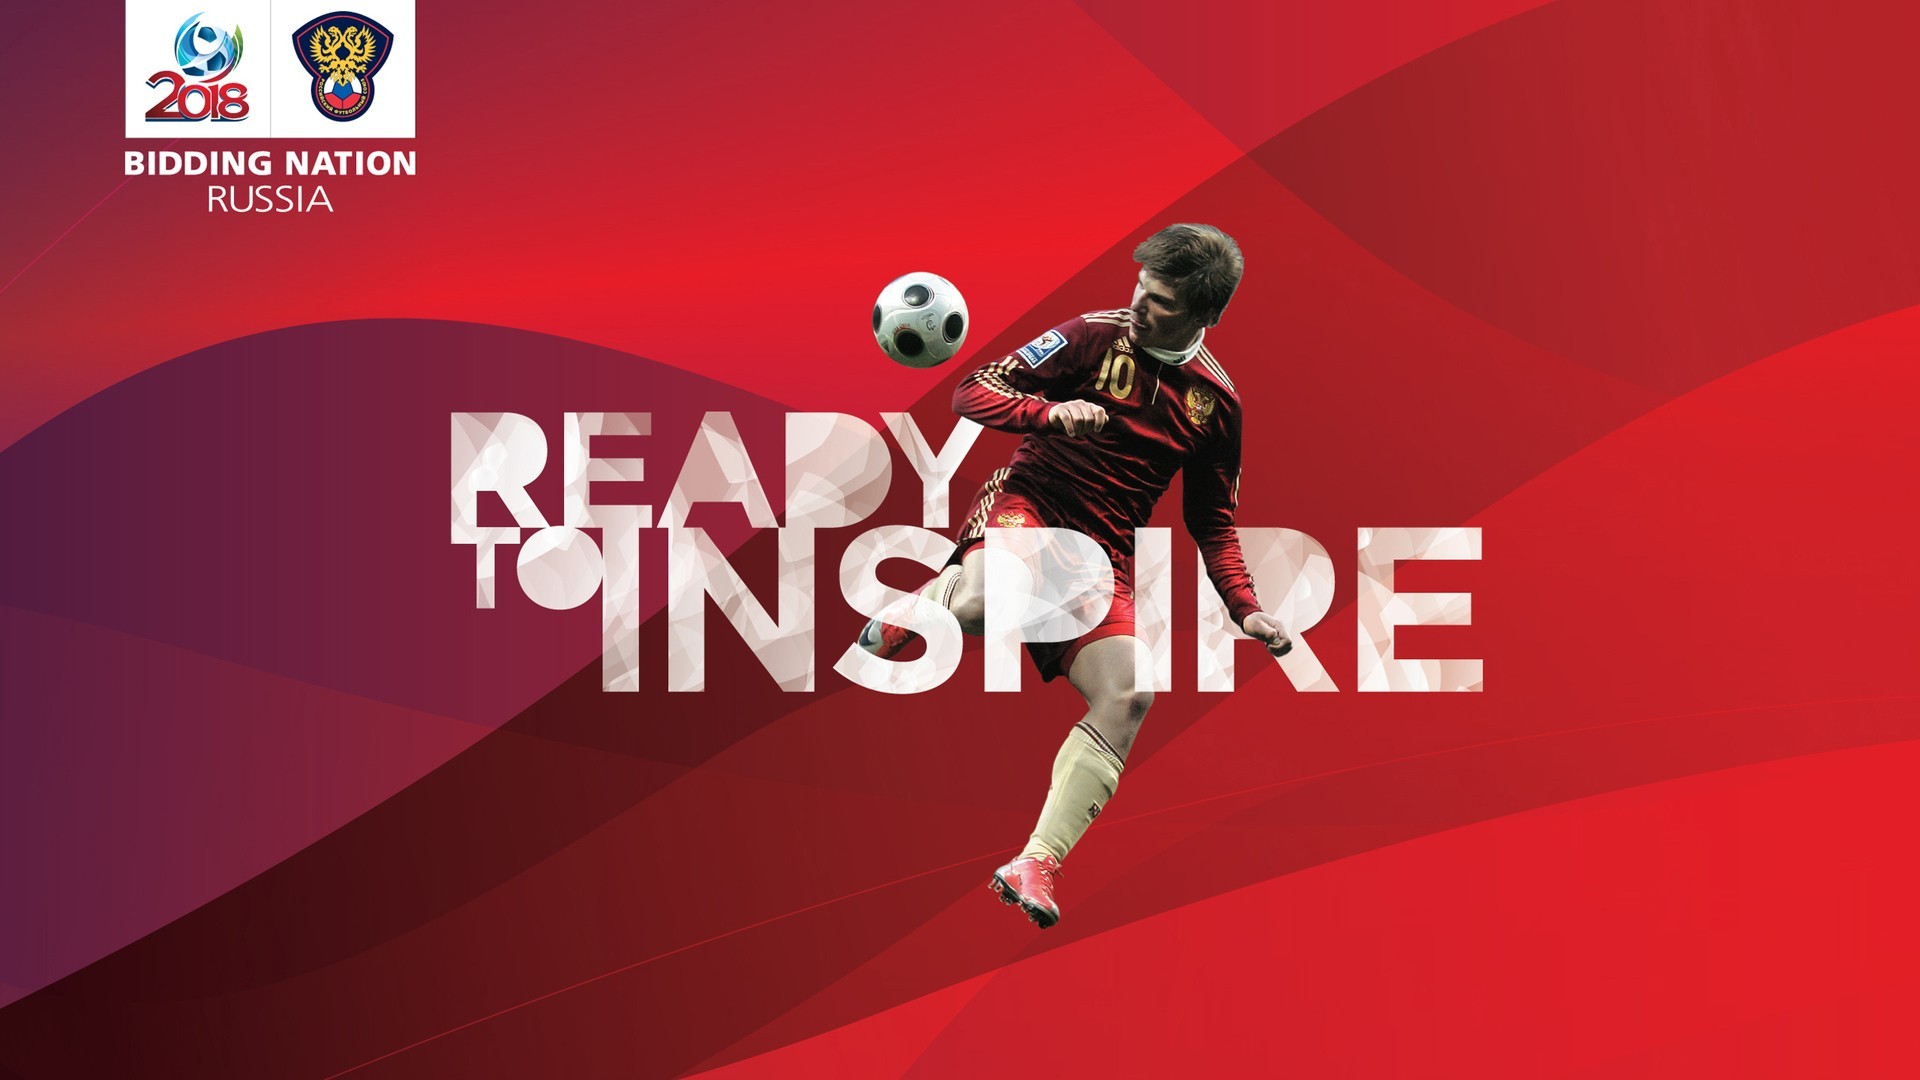 General 1920x1080 Russia FIFA World Cup Andrey Arshavin red soccer 2018 (year) men sport